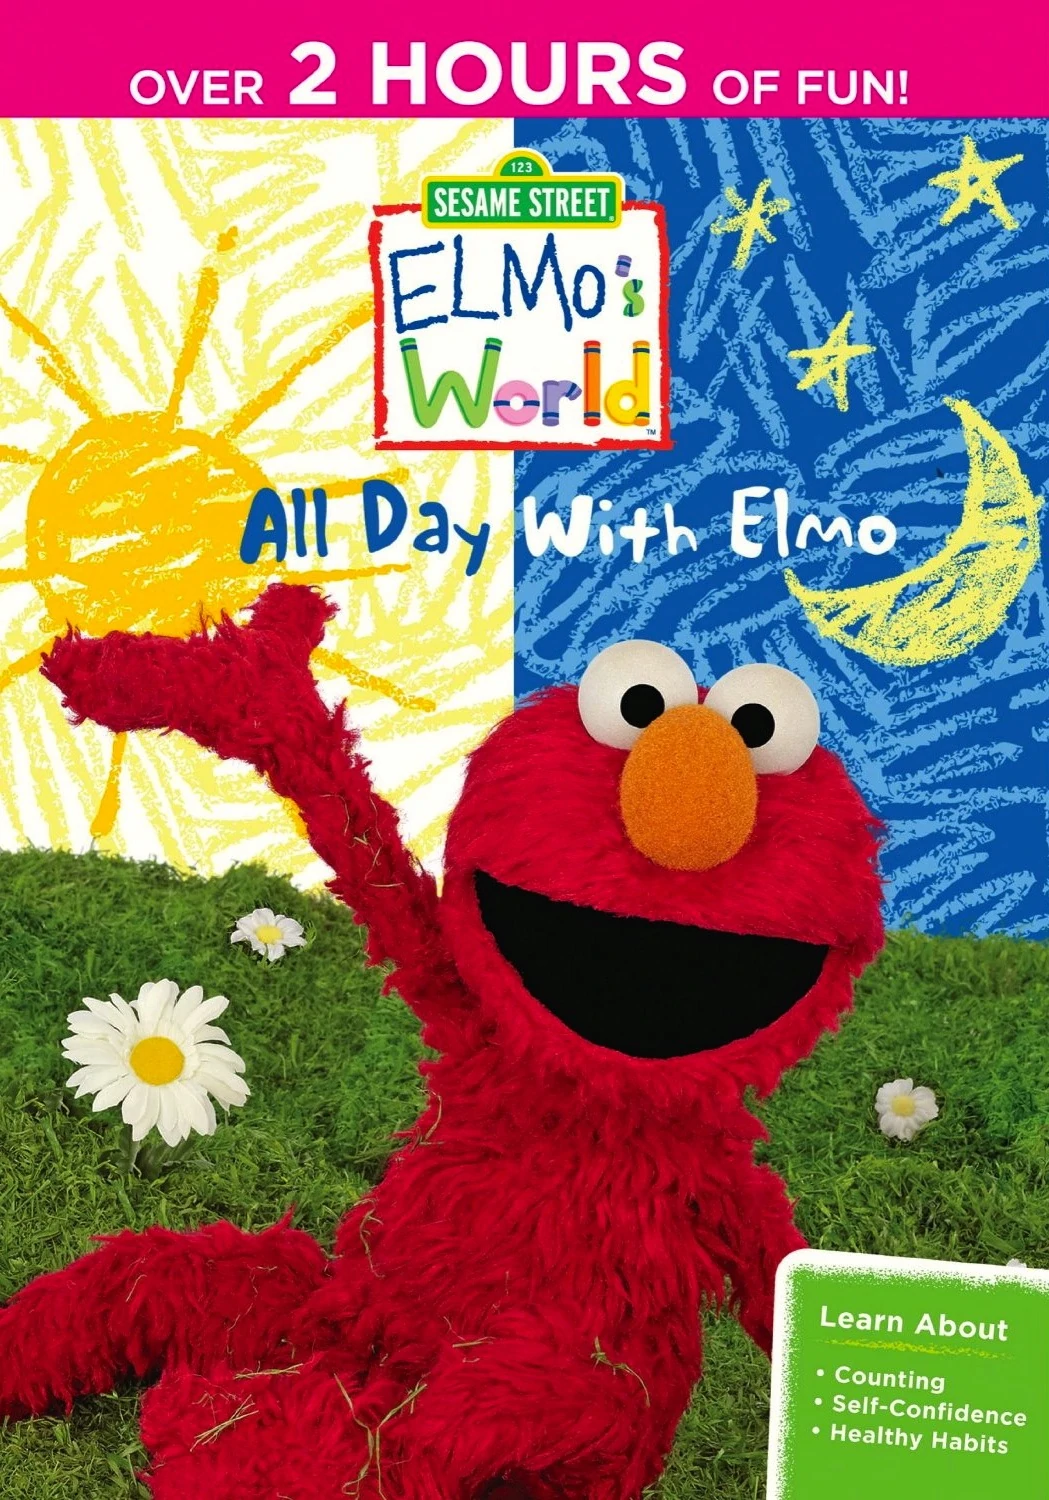 "Elmo's World: All Day with Elmo" "Getting ...